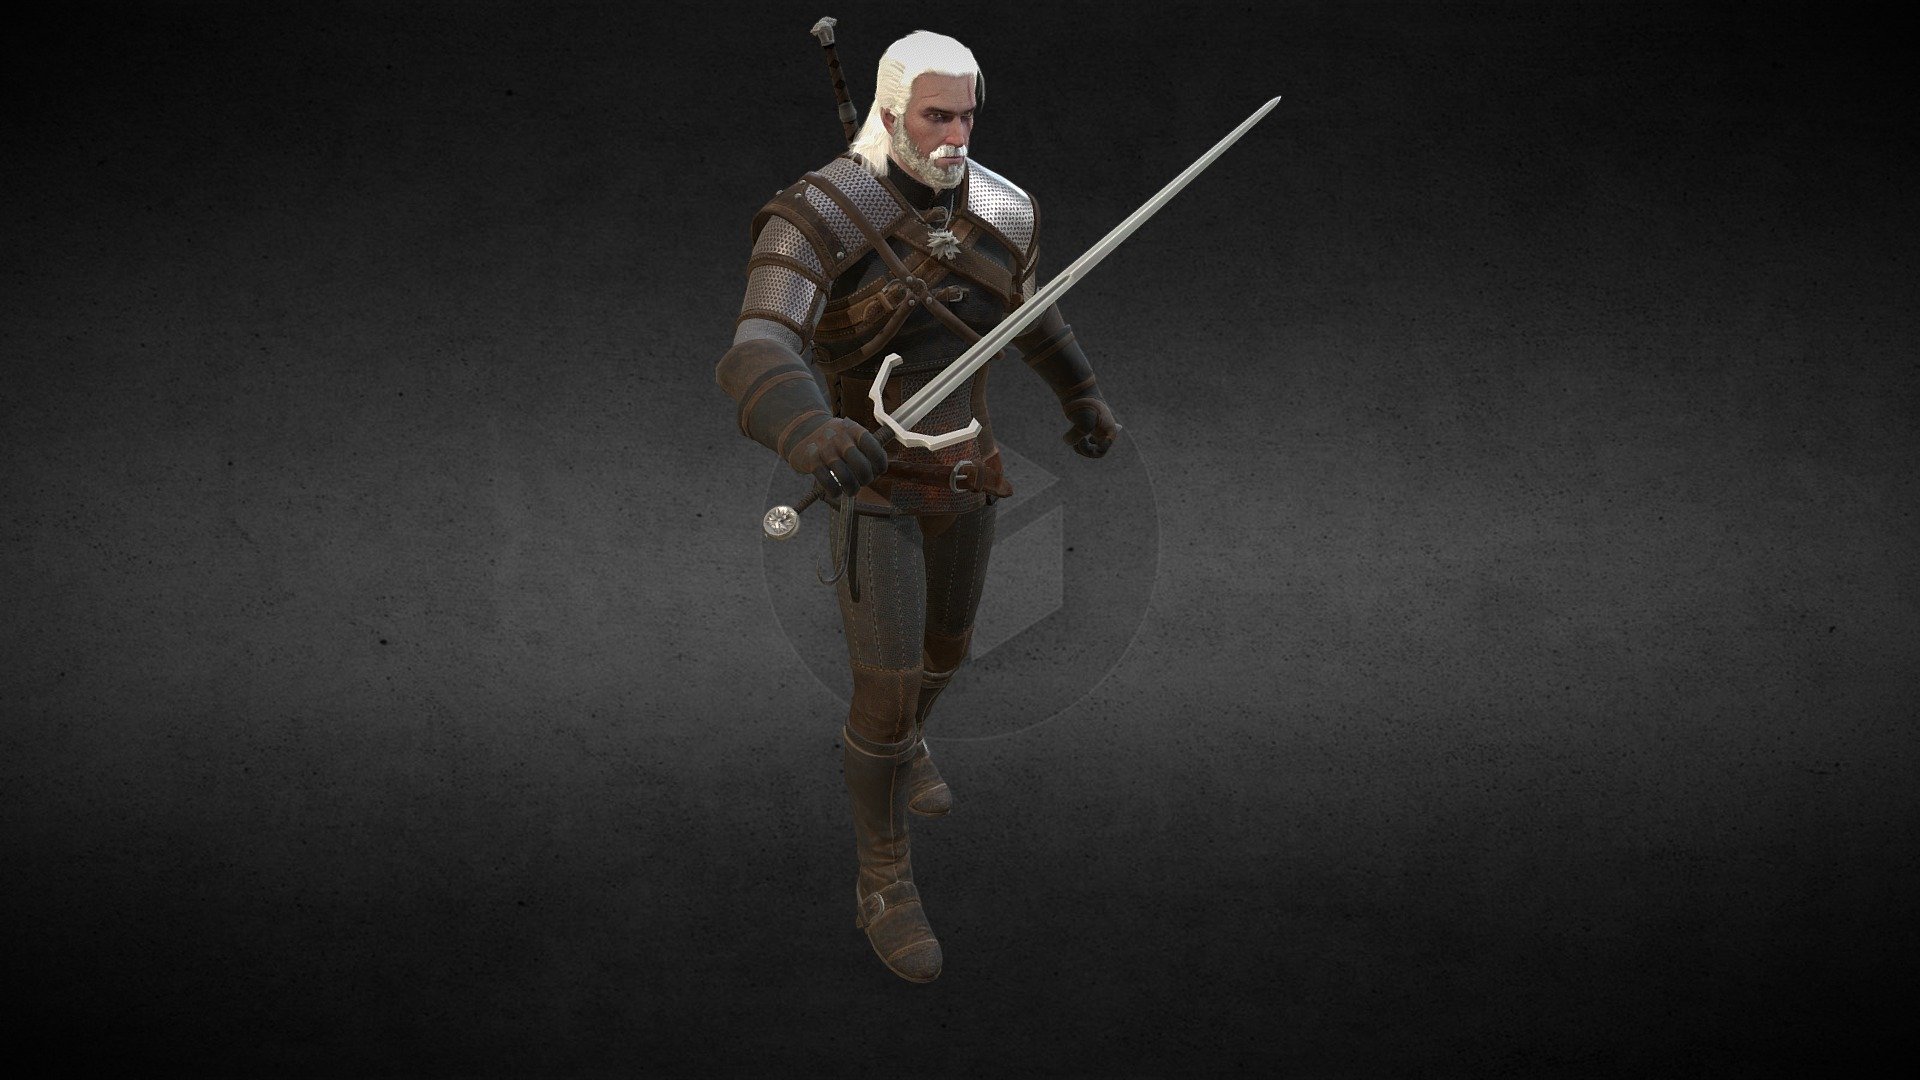 The Geralt of rivia..
I retextured the model and fixed some parts of it......you can say that its a better remaked version of the real model which me and my friends made long time ago from the game.

Will soon release it after some more rigging and fixes :D

USE IT AS YOU LIKE BUT PLEASE DON'T FORGET TO GIVE ME AND &ldquo;CD Projekt